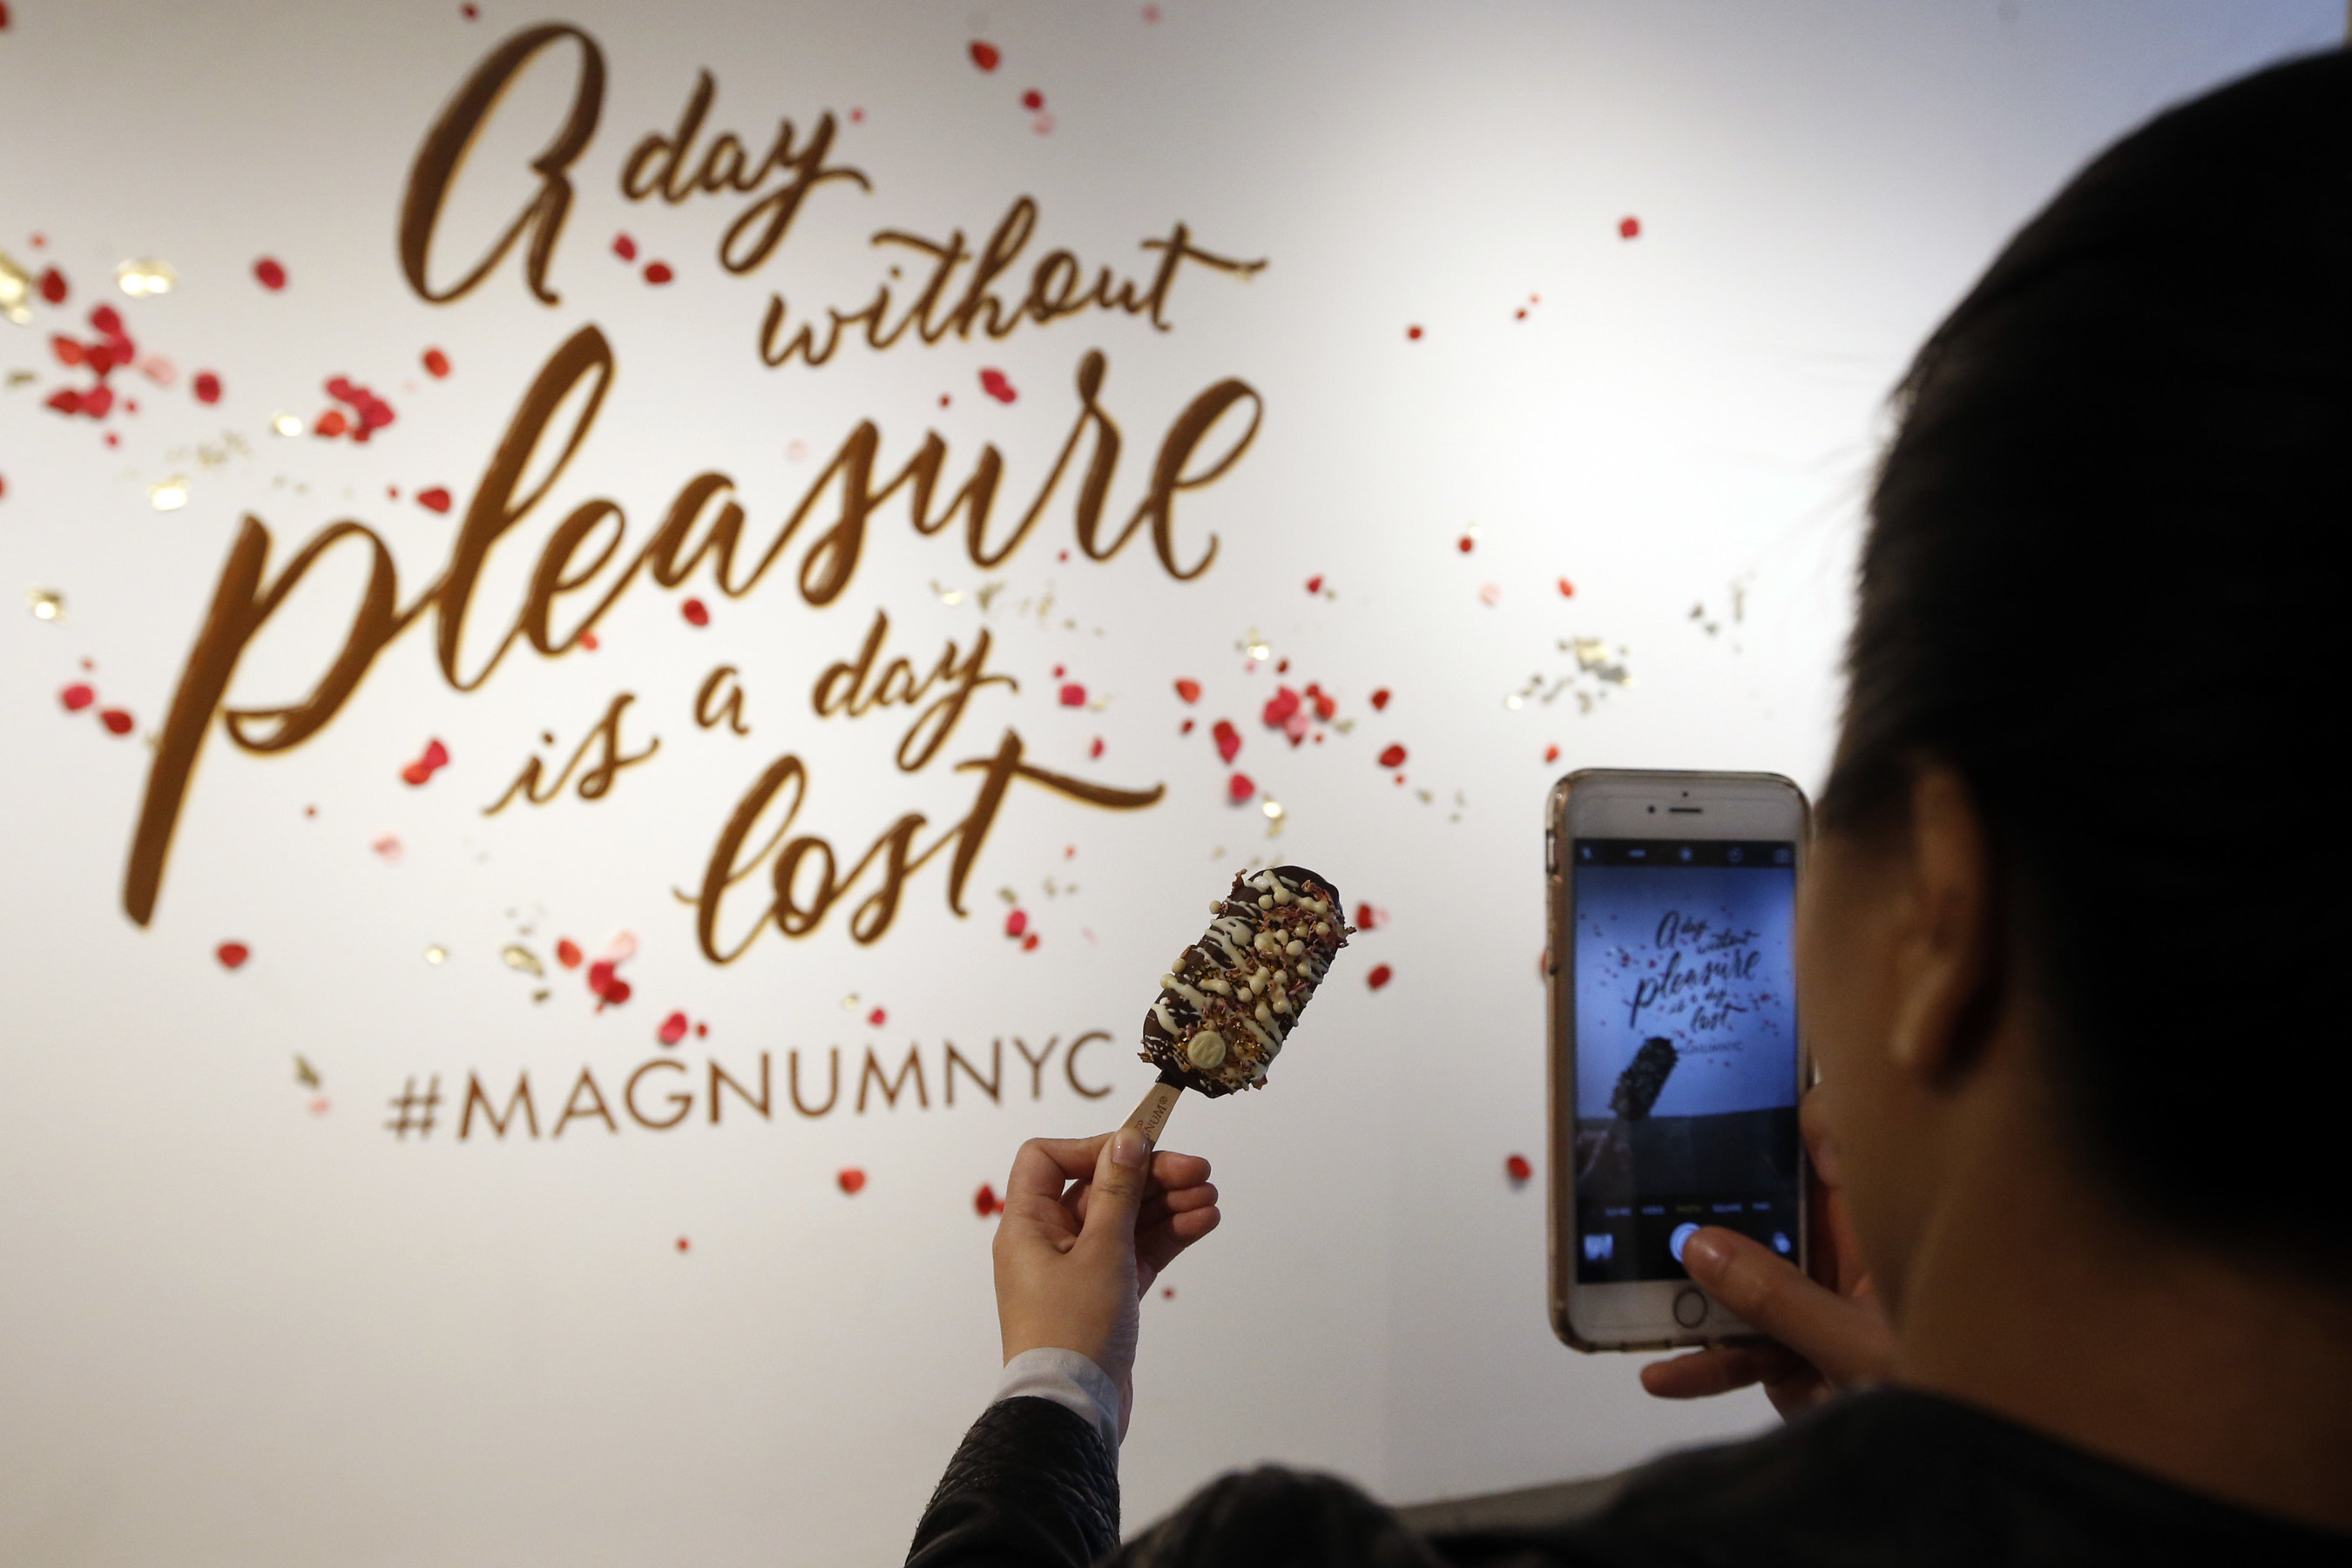 A guest at MAGNUM New York captures a close-up photo of a custom MAGNUM Ice Cream bar. At the store's "dipping bar," guests can create custom MAGNUM bars with a selection of decadent ingredients, including rose petals, espresso sugar and gogi berries. This is the first U.S. storefront for MAGNUM Ice Cream and it's located at 134 Prince Street in SoHo; for more information, visit Facebook.com/MAGNUM. (Photo by Jason DeCrow for MAGNUM)